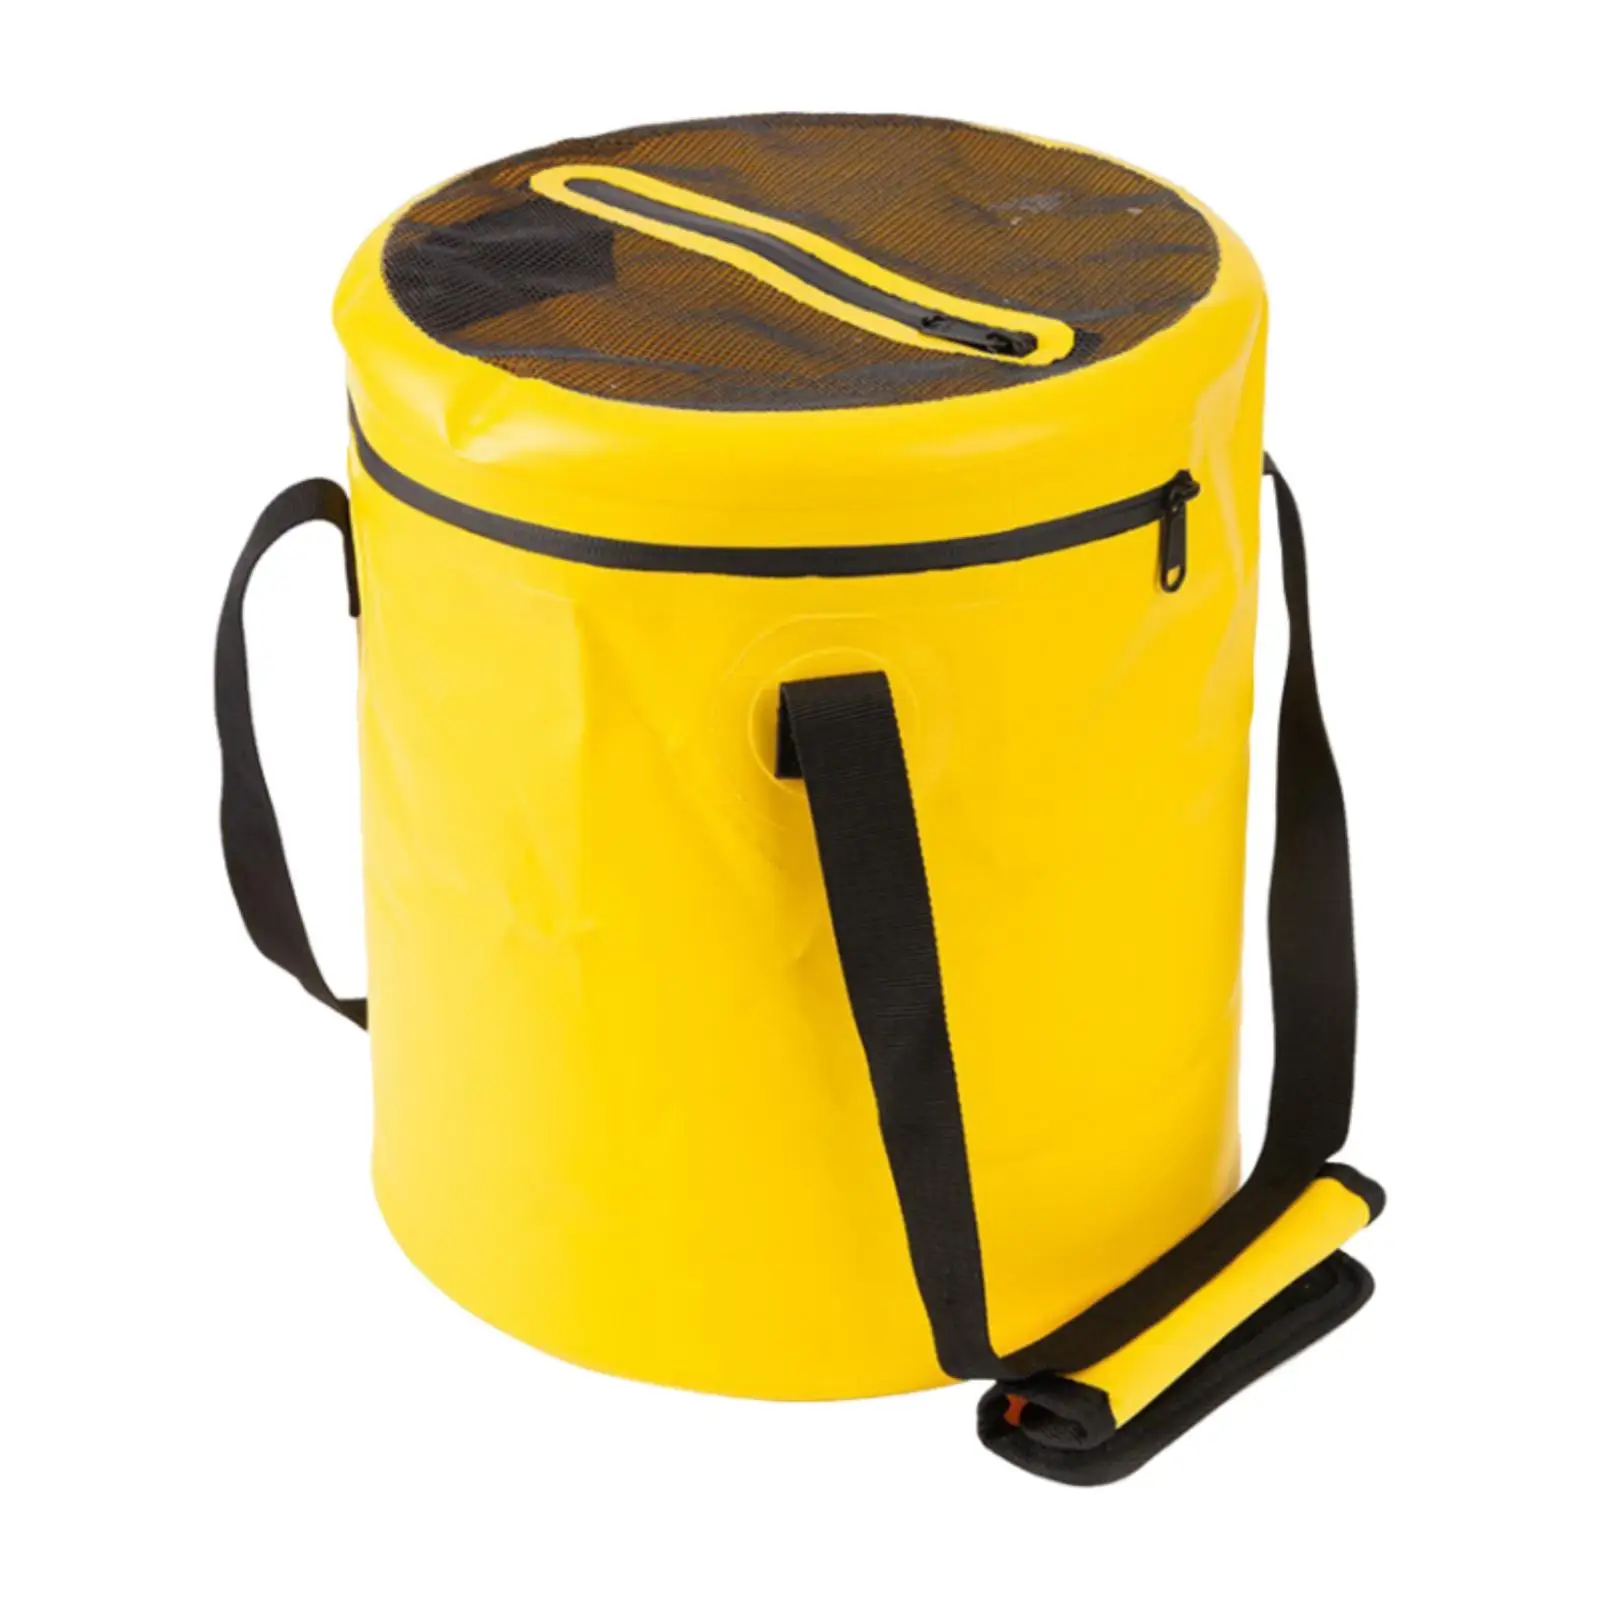 Collapsible Camping Fishing Bucket with Handle Wash Basin Folding Bucket for Camping Boating Gardening Picnic Backpacking